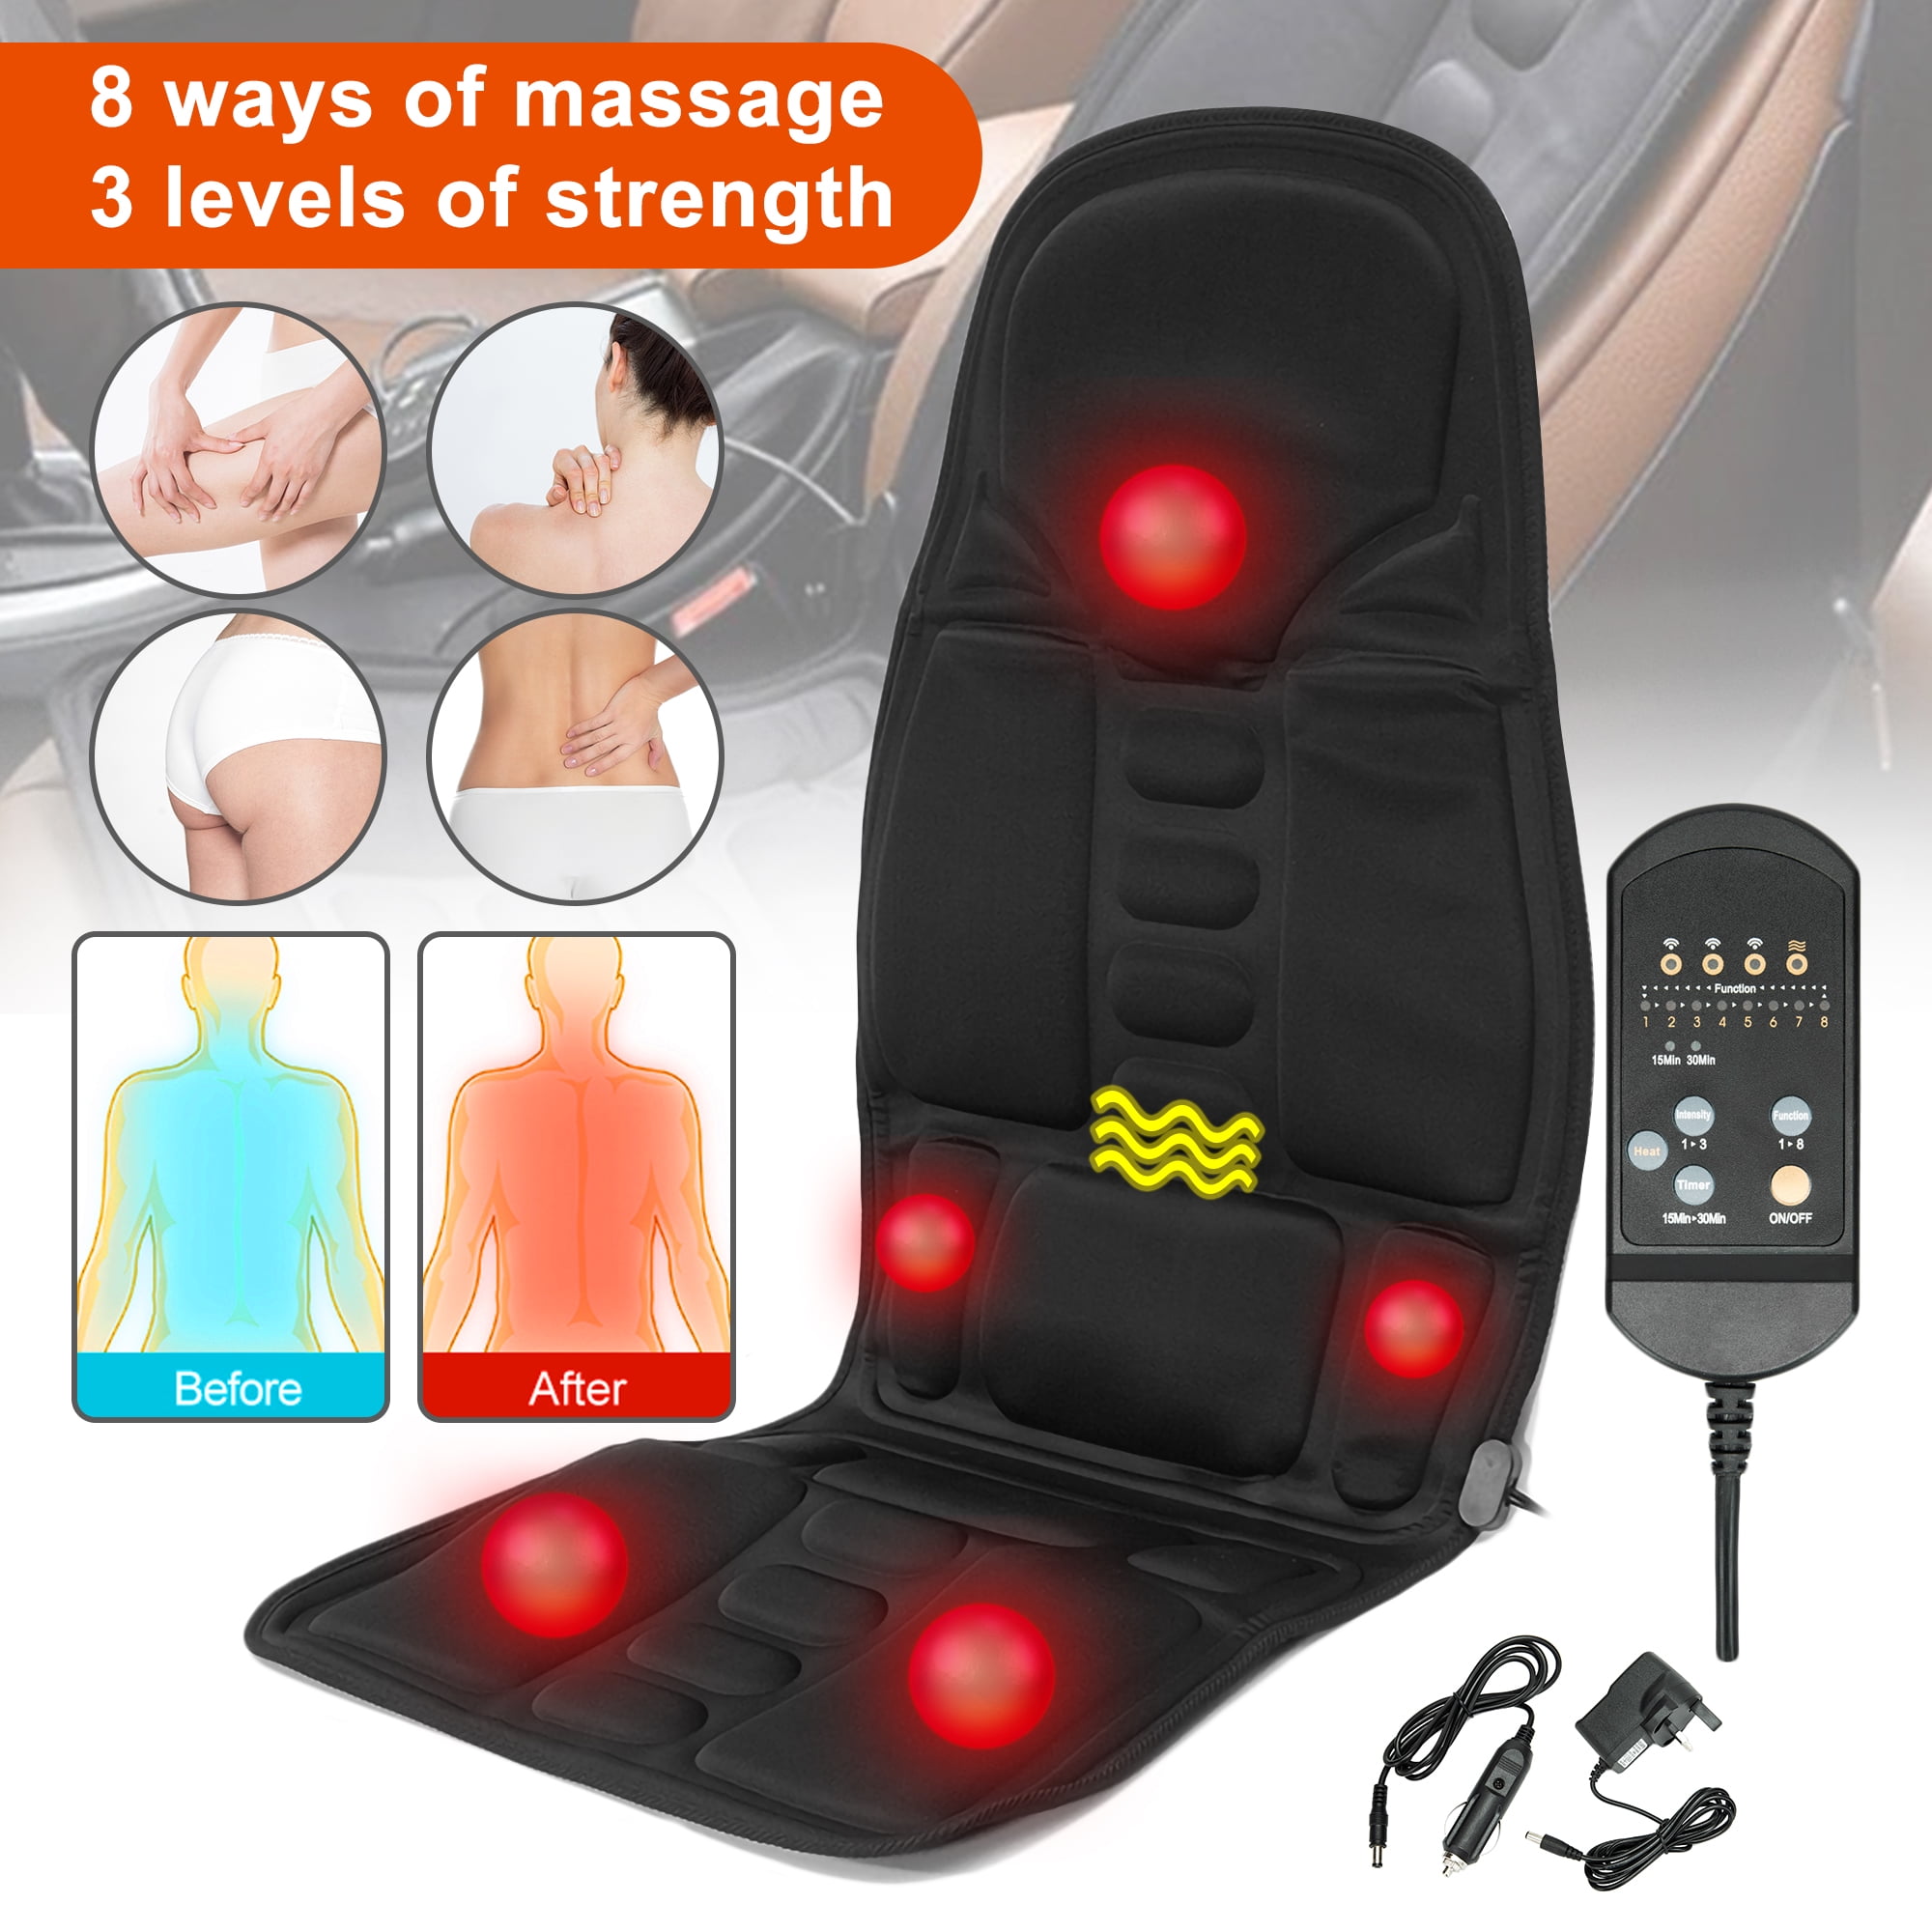 Electric Vibration Back Massager Chair Cushion Vibrates with Heat for –